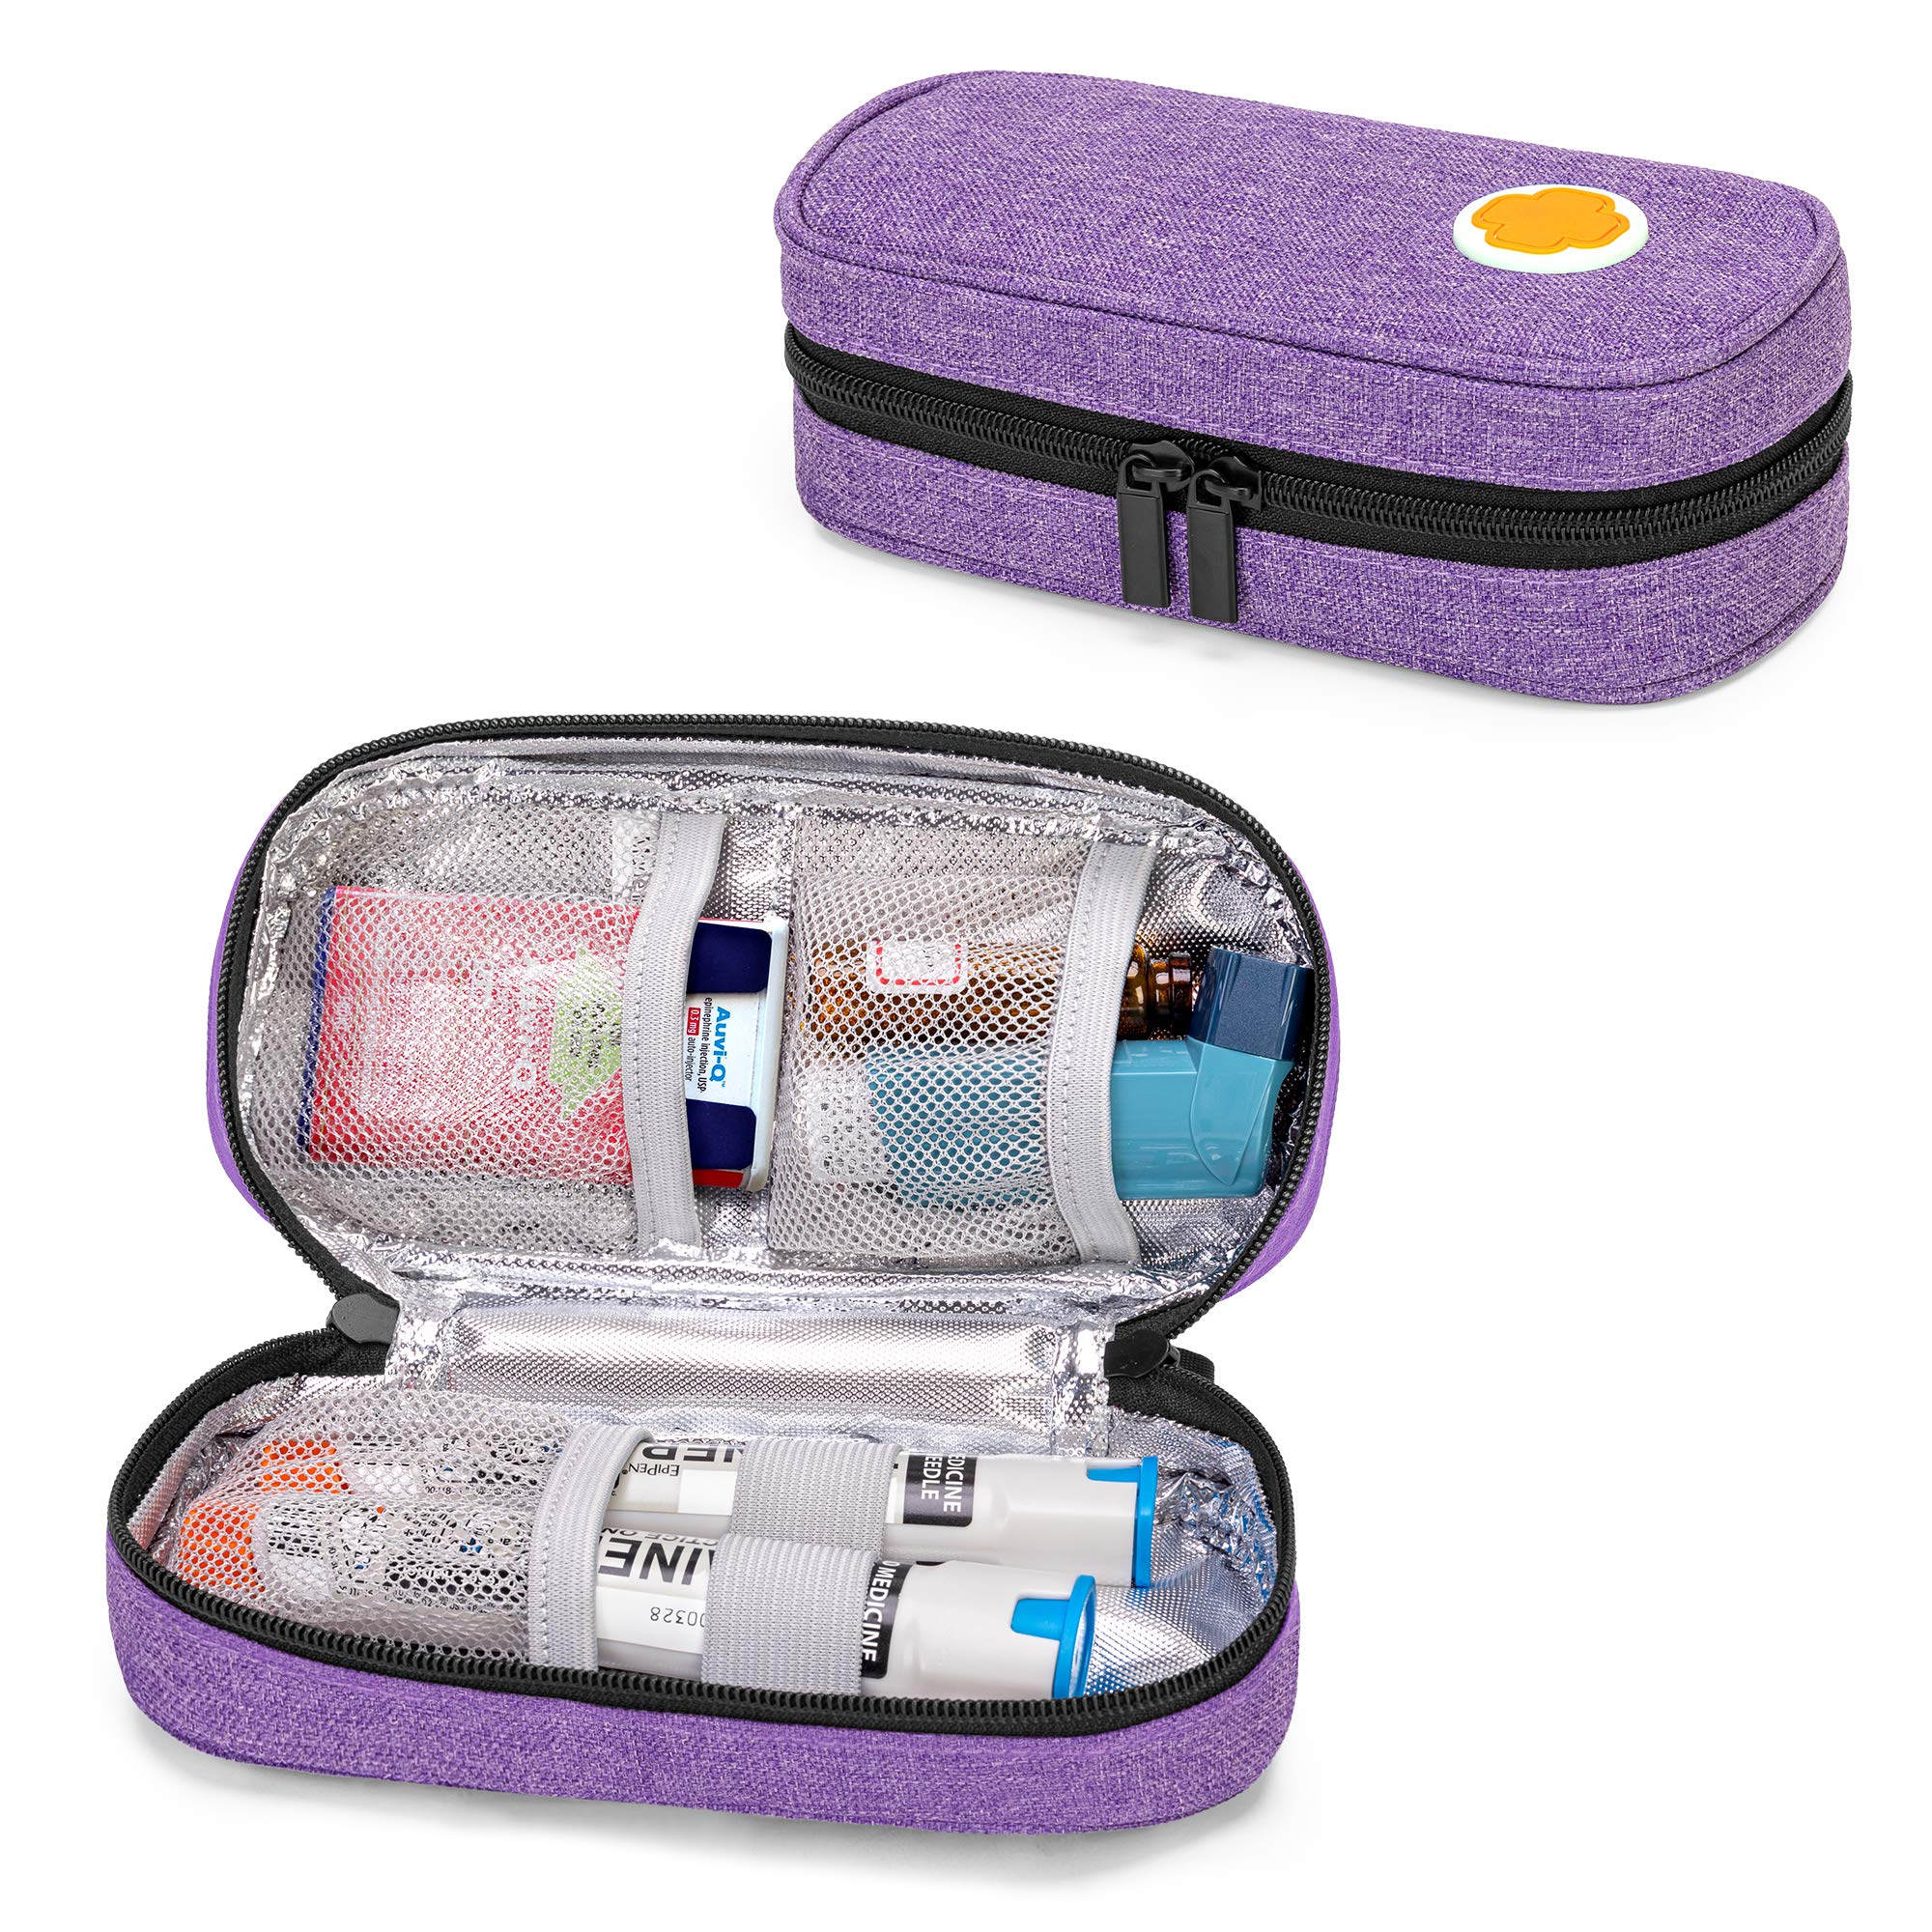 EpiPen Bag | Insulated Epipen case | Medication Bag | Anaphylaxis